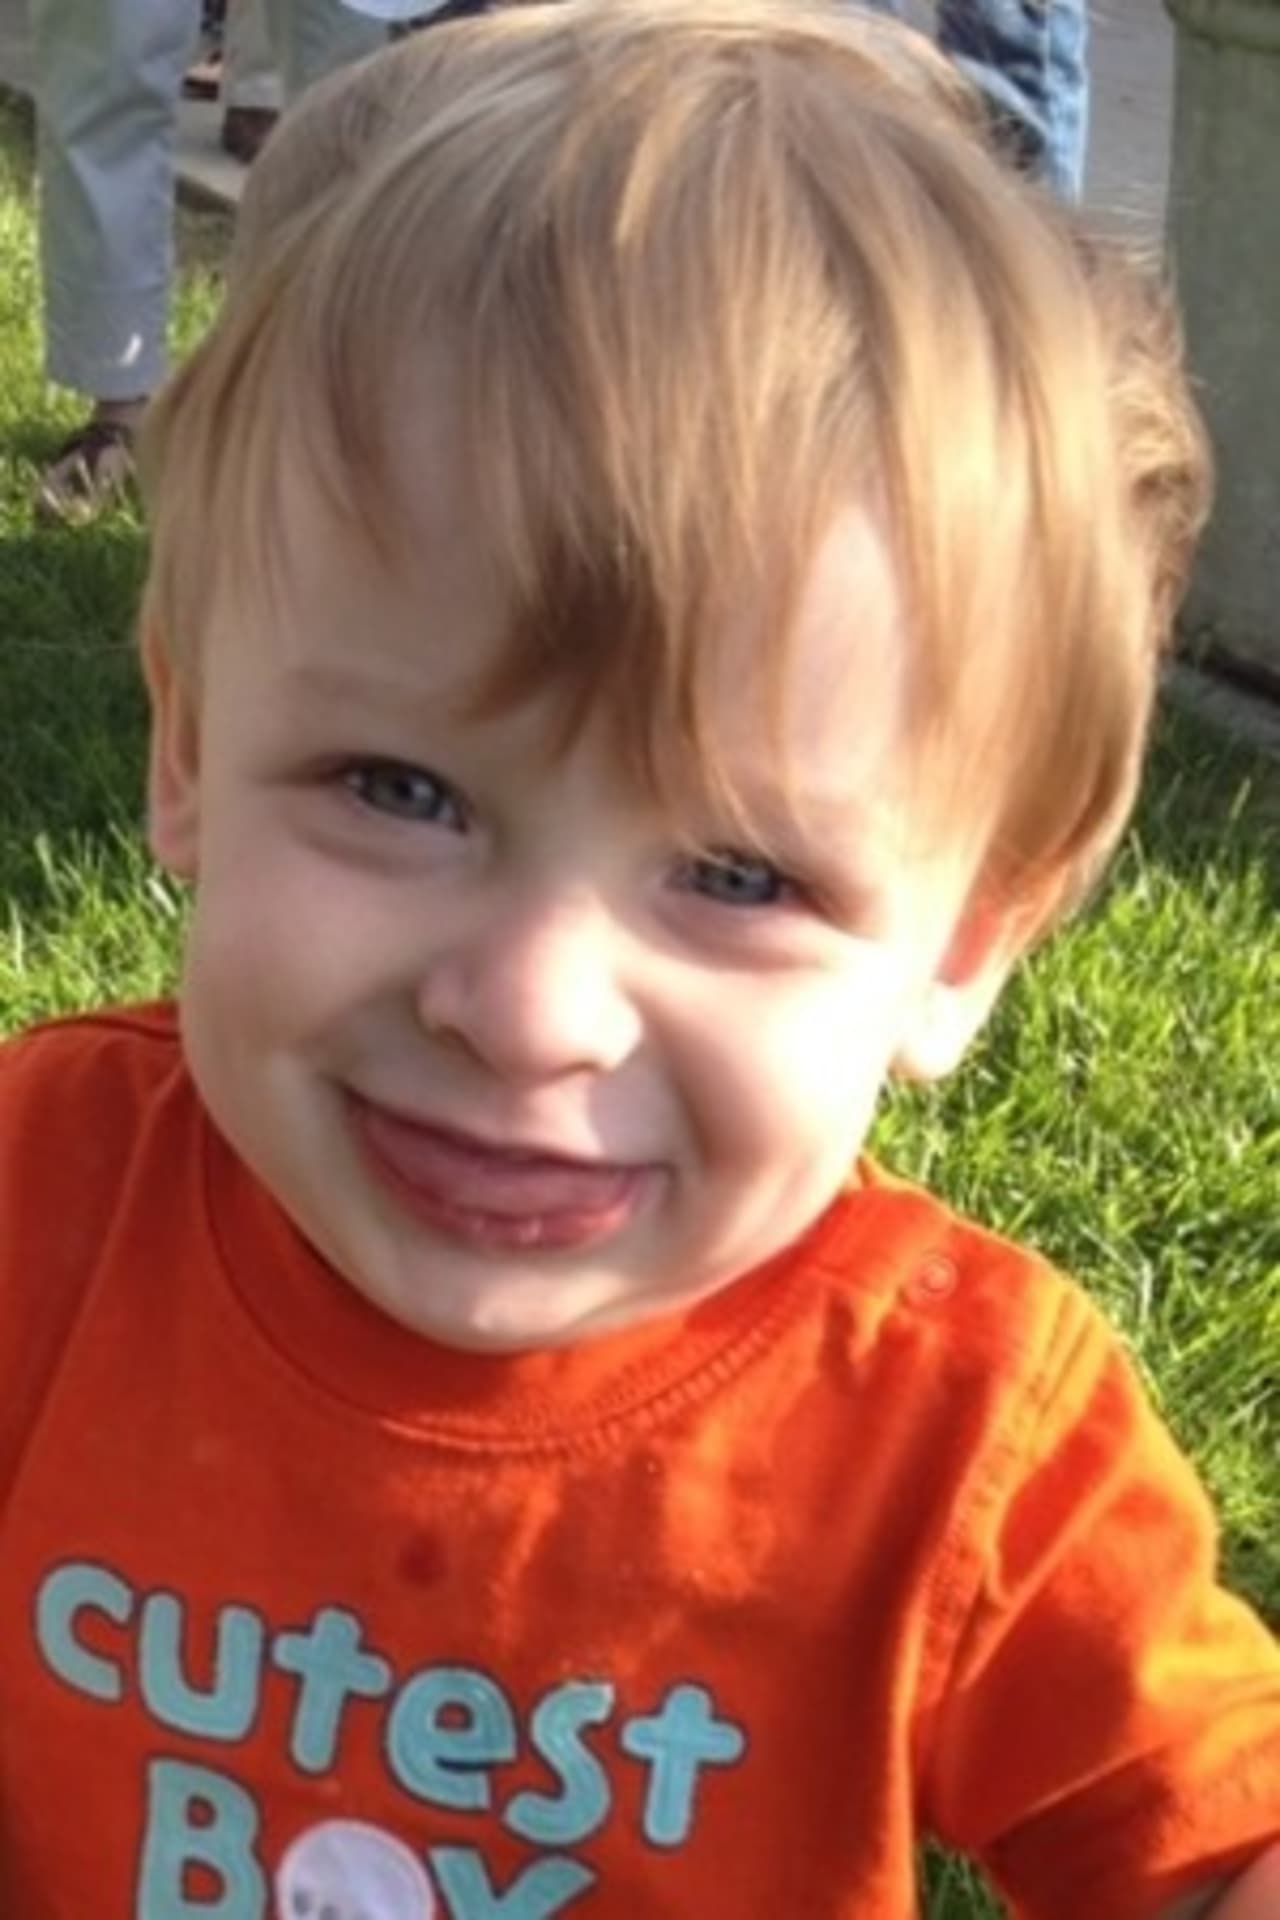 Benjamin Seitz, 15 months old, died July 7 after being left in a hot car at his father's workplace in Ridgefield. His death was ruled a homicide. 